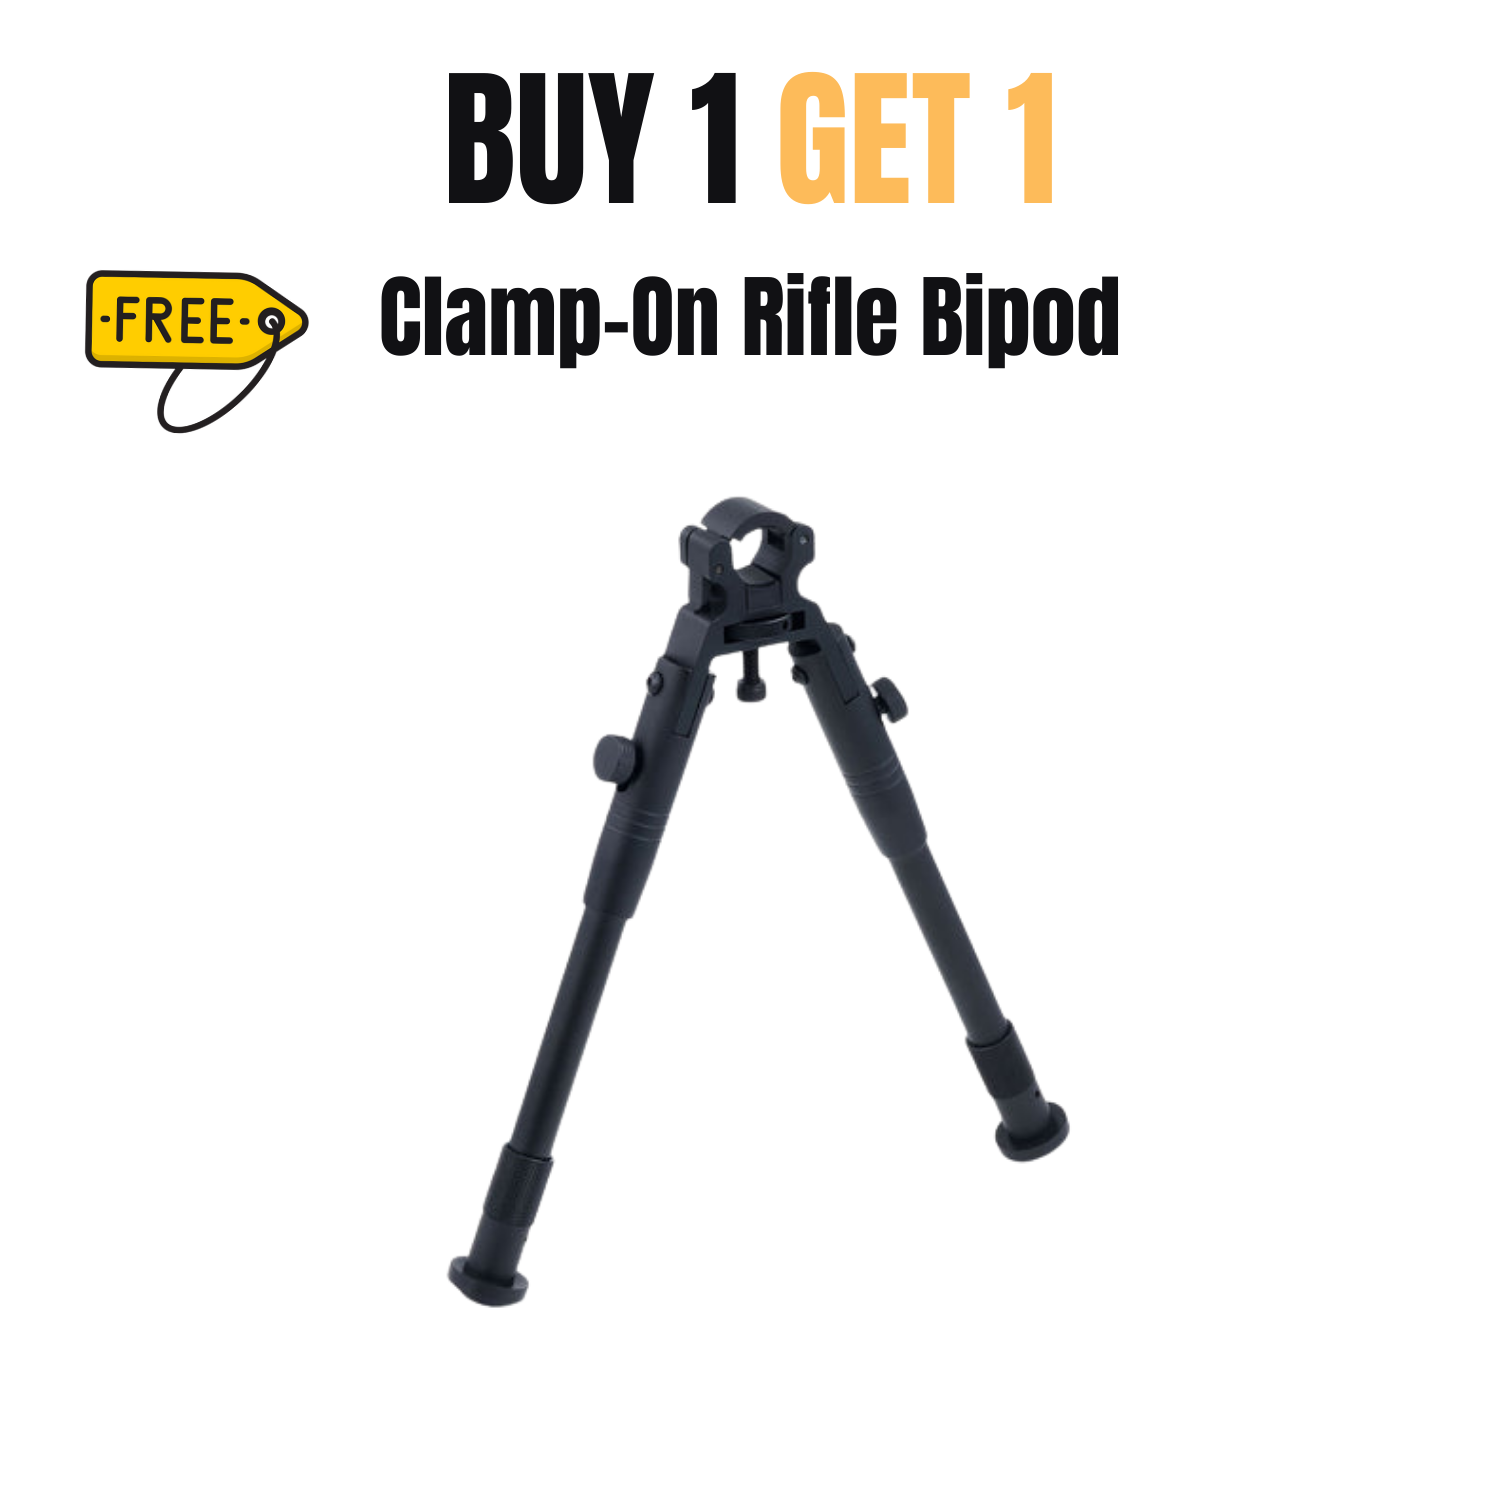 【BUY 1 GET 1 FREE】3-9x42 Mil Dot Tactical Hunting Rifle Scope with Laser and Reticle Adjustment & Multicoated Green Lens